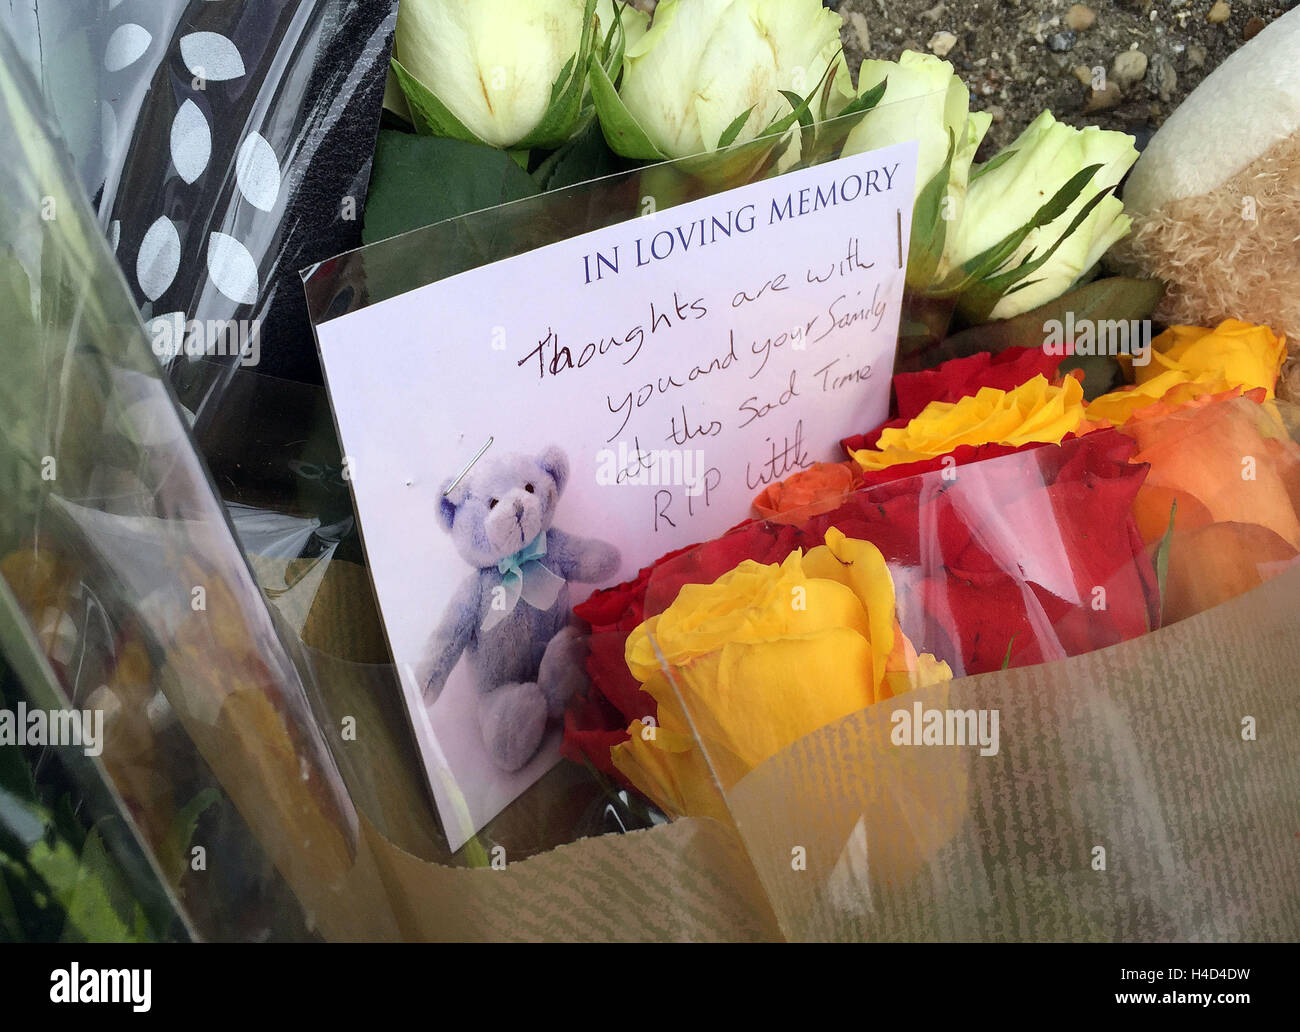 Floral tributes outside a house on the junction of Harwich Road with Tara Close in Colchester, Essex, after a baby boy was killed and a second child injured in a dog attack. Stock Photo